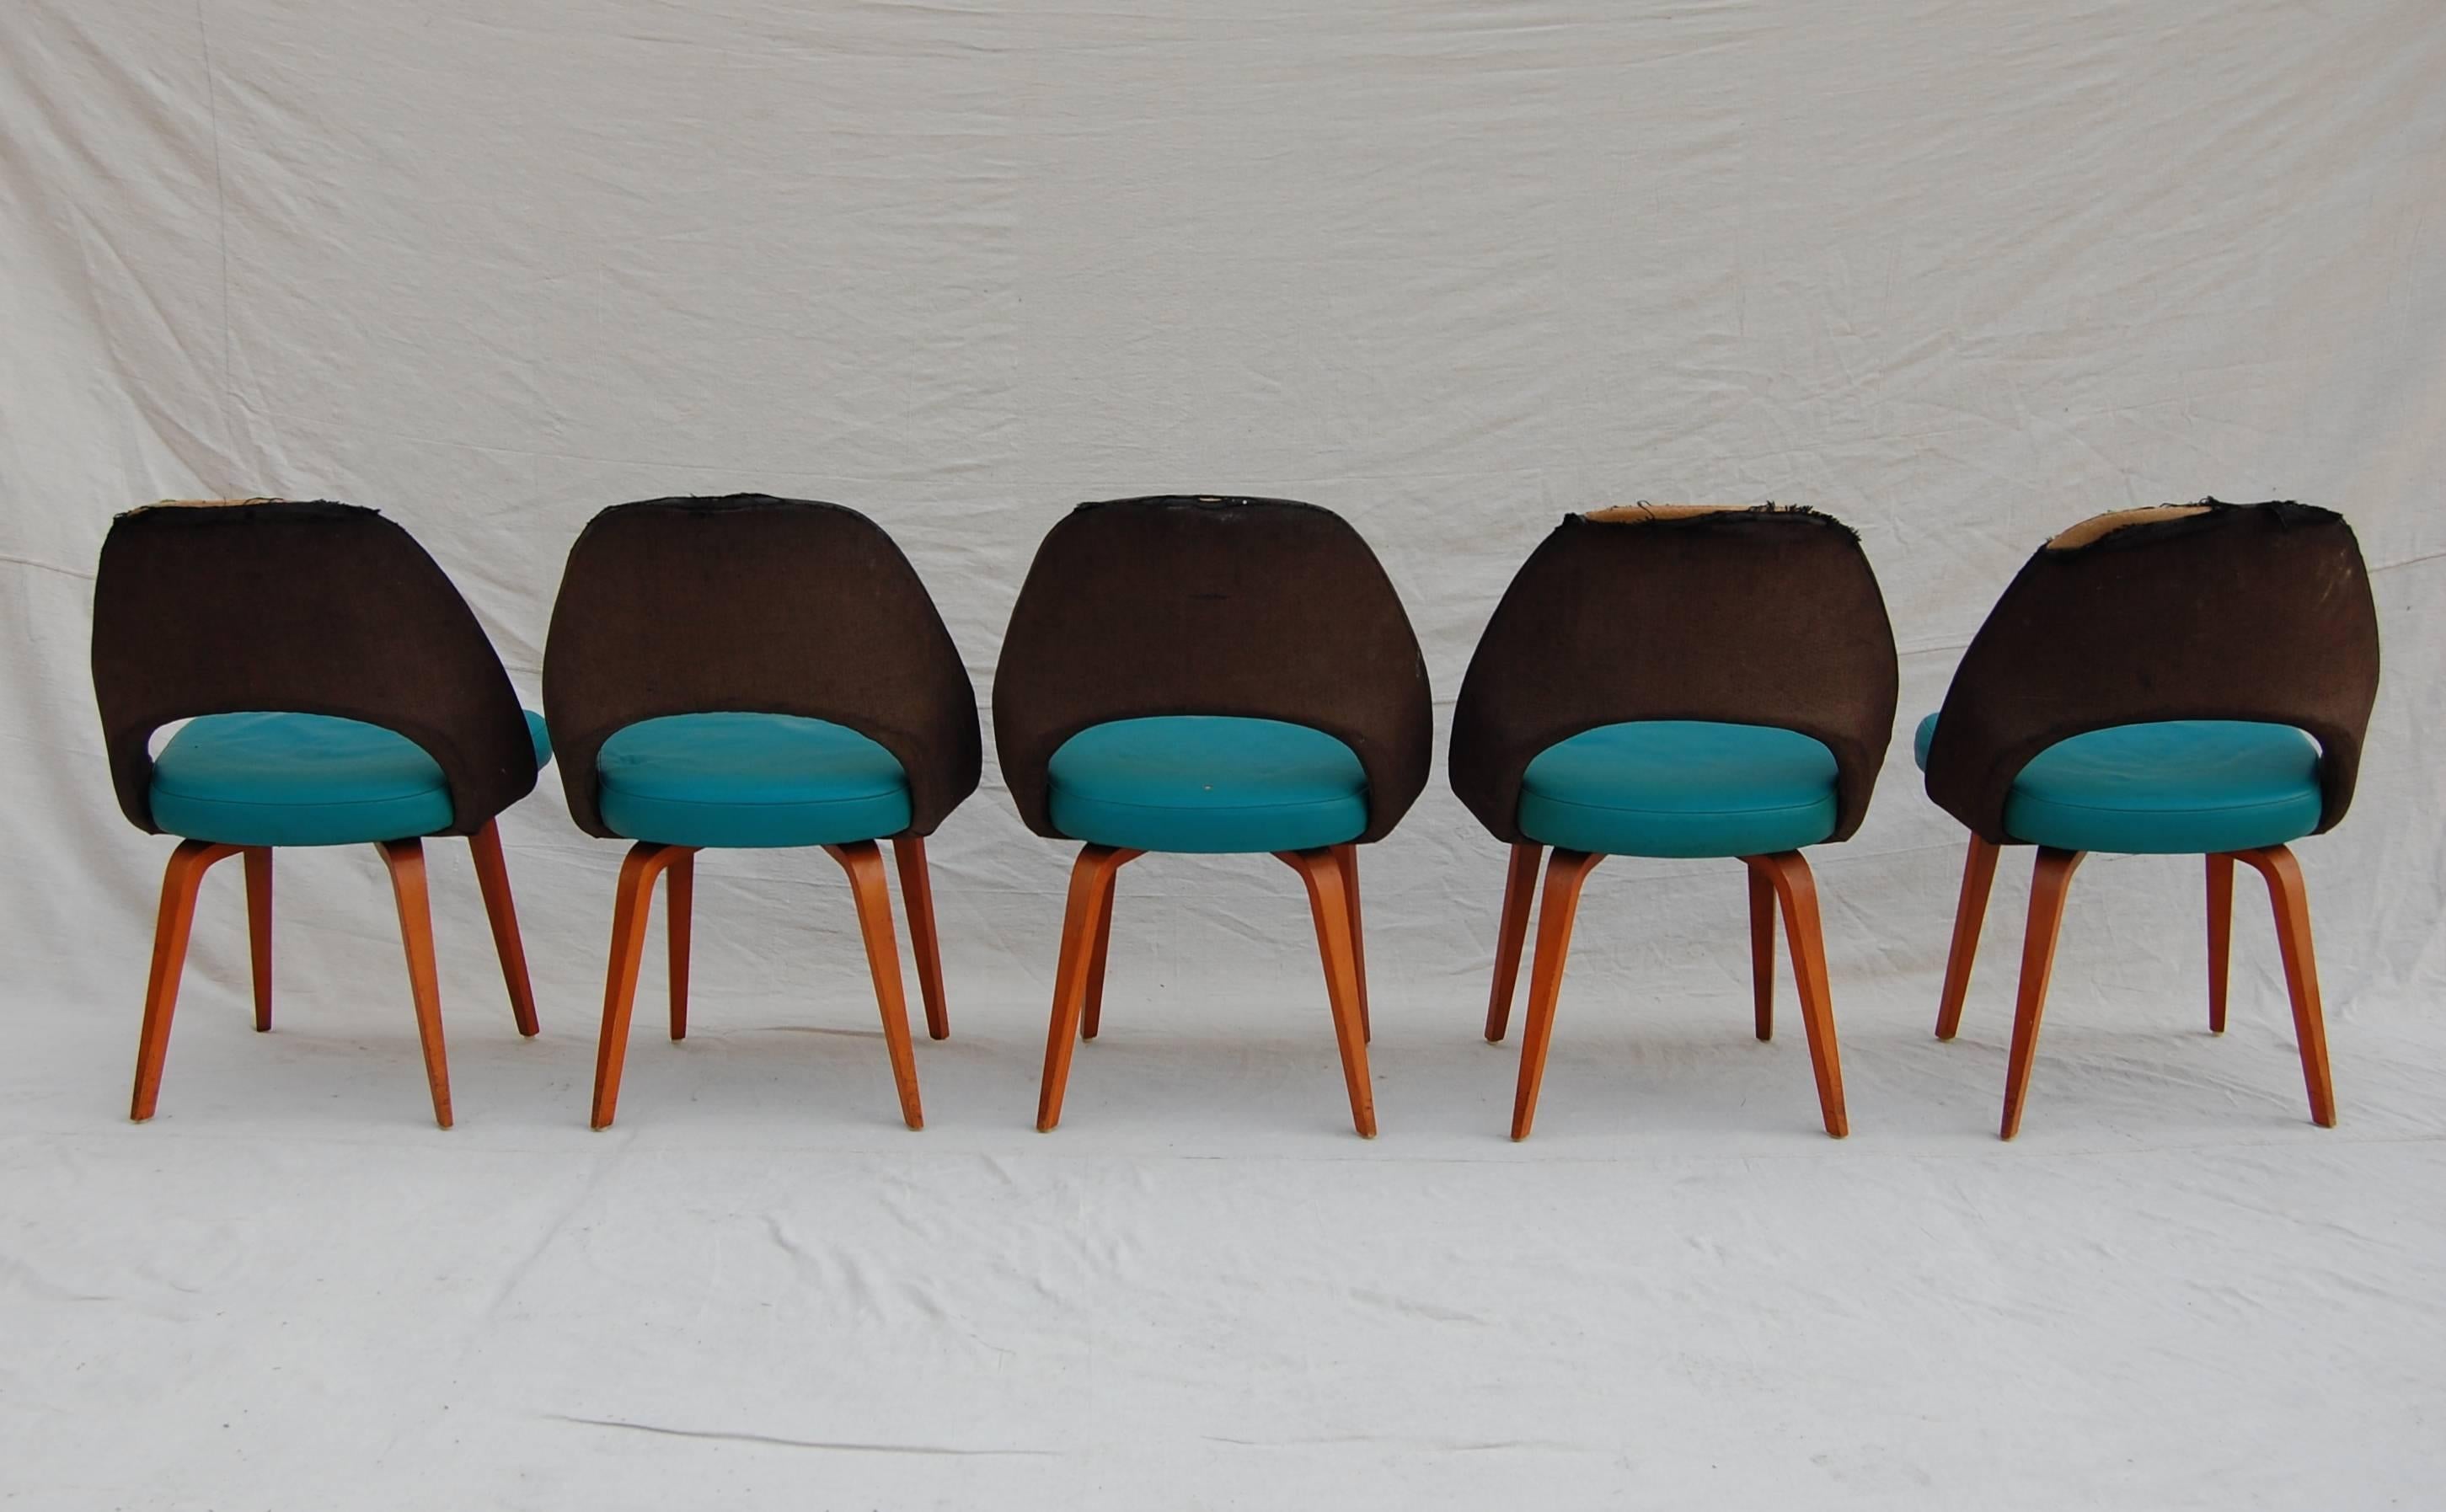 American Set of Ten Saarinen for Knoll Executive/ Dining Chairs, Wood Legs